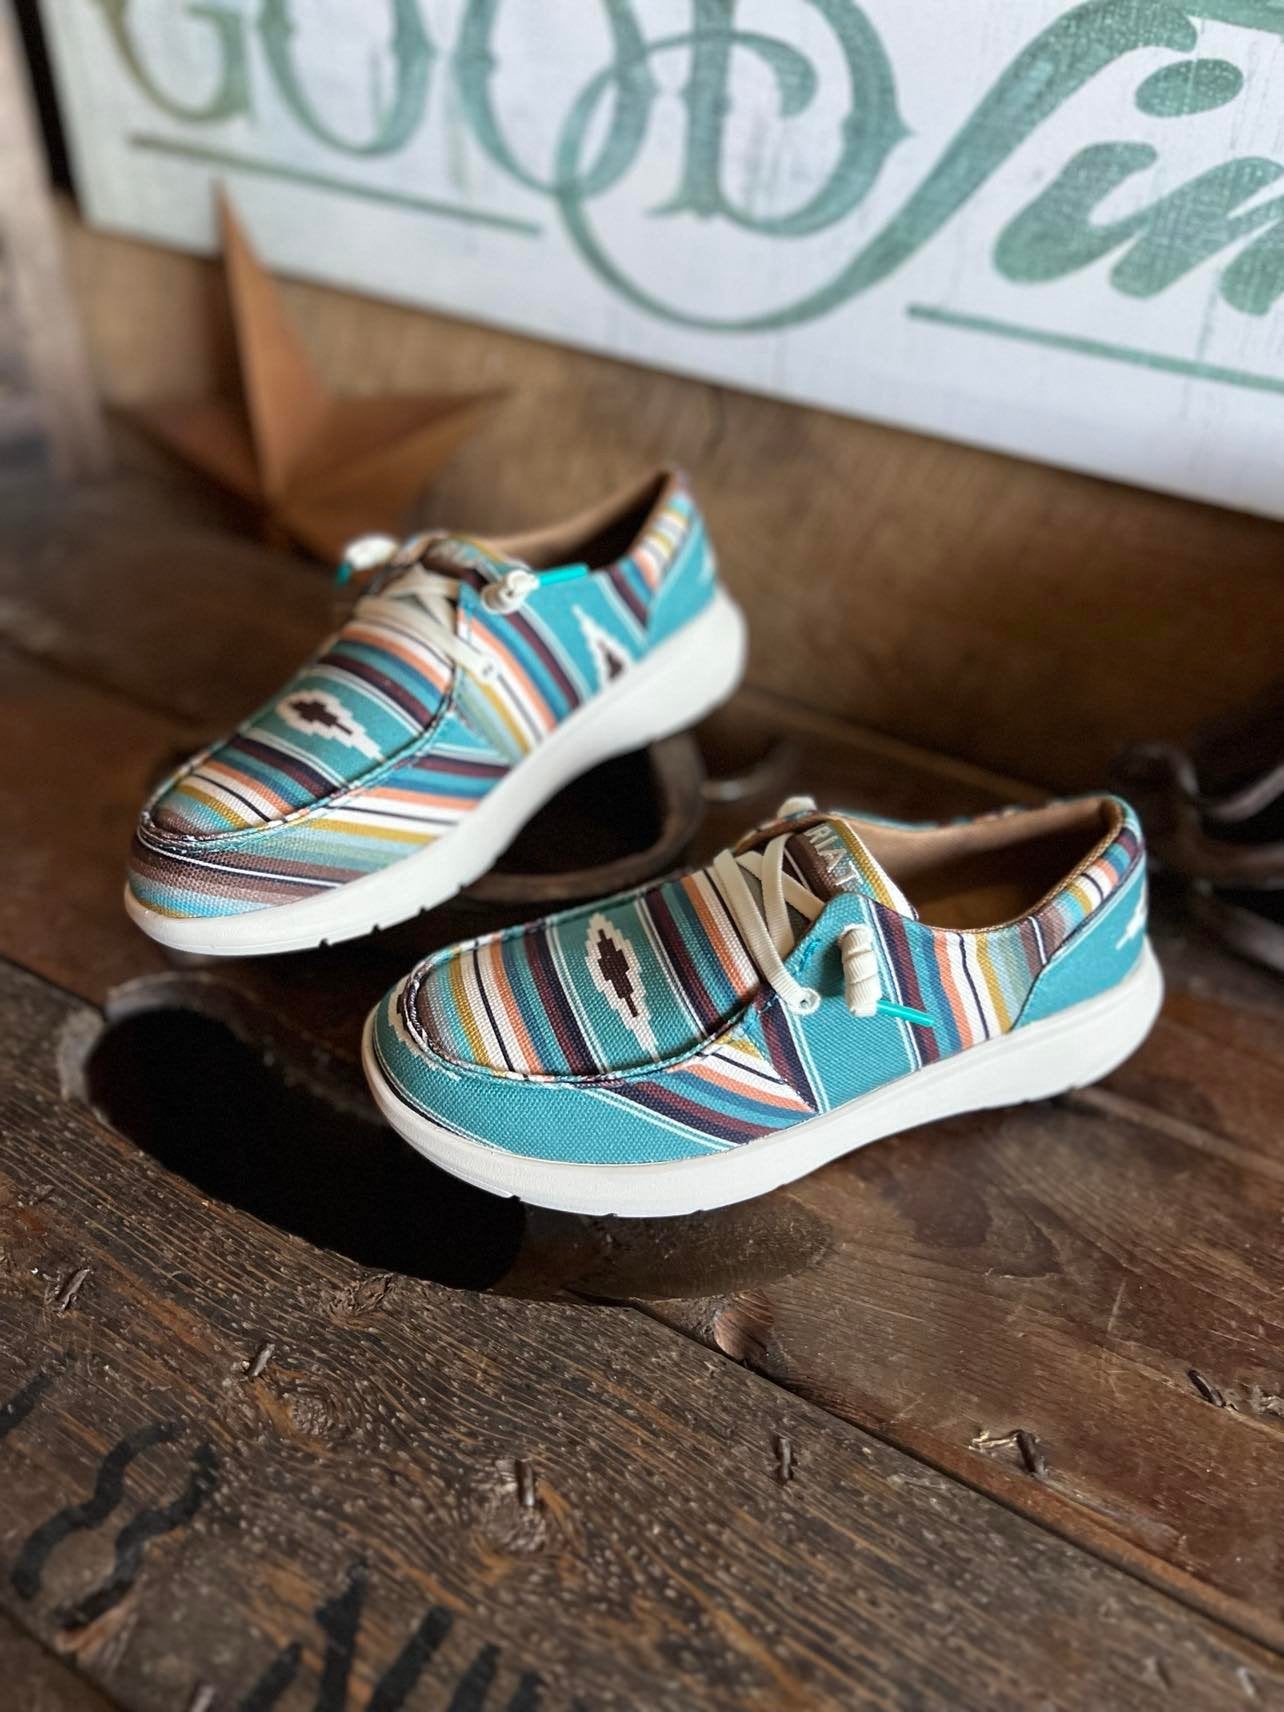 Ariat Women's Turquoise Serape Hilo *FINAL SALE*-Women's Casual Shoes-Ariat-Lucky J Boots & More, Women's, Men's, & Kids Western Store Located in Carthage, MO